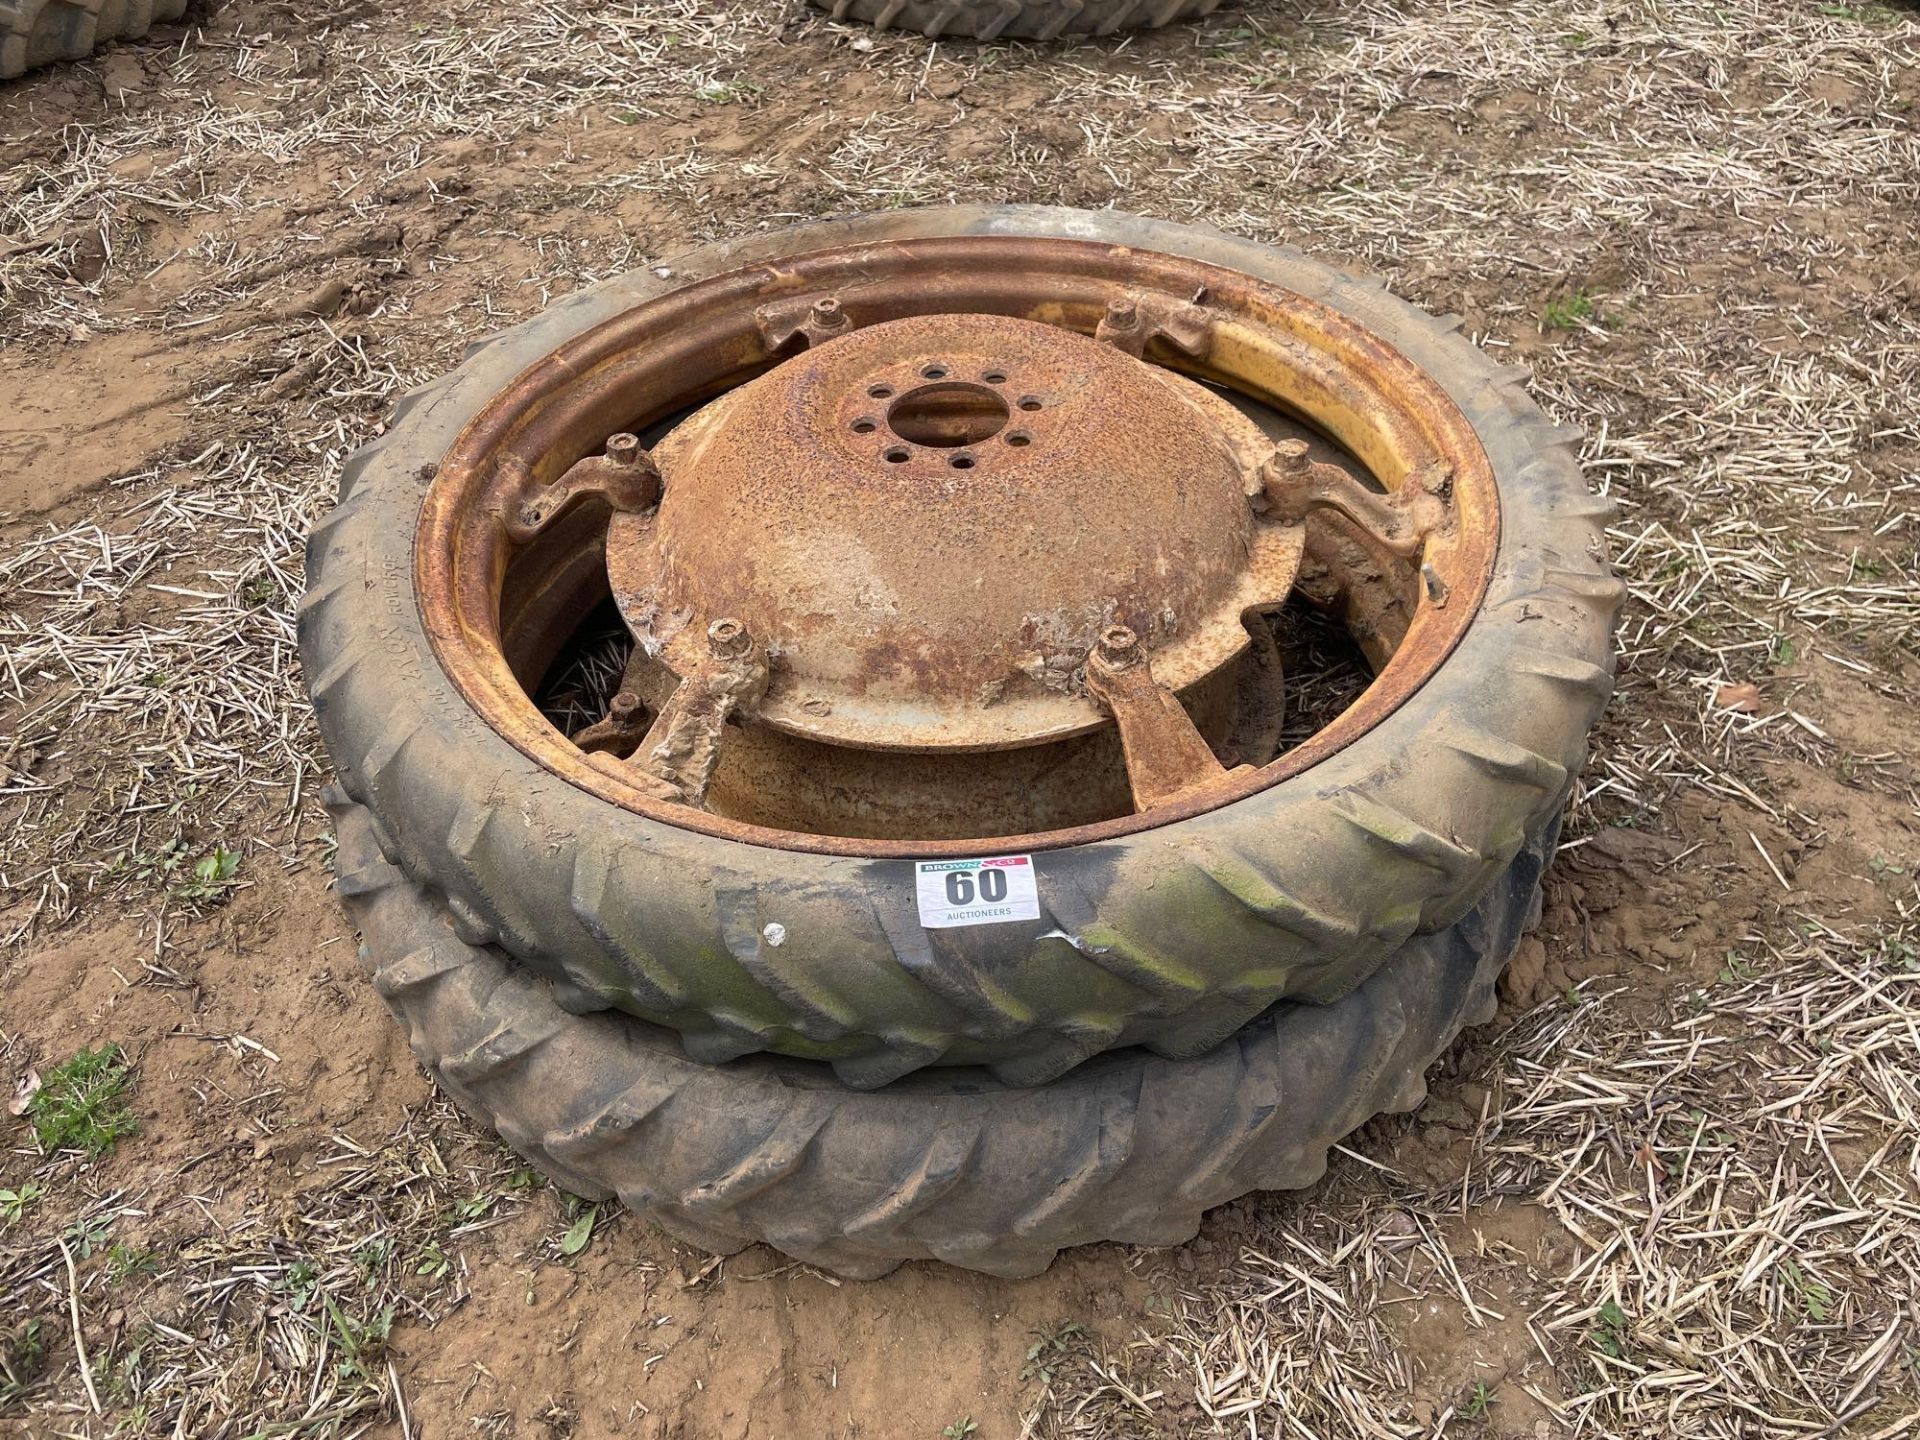 Pair Avon 6.00/36 row crop wheels and tyres with 8 stud centres